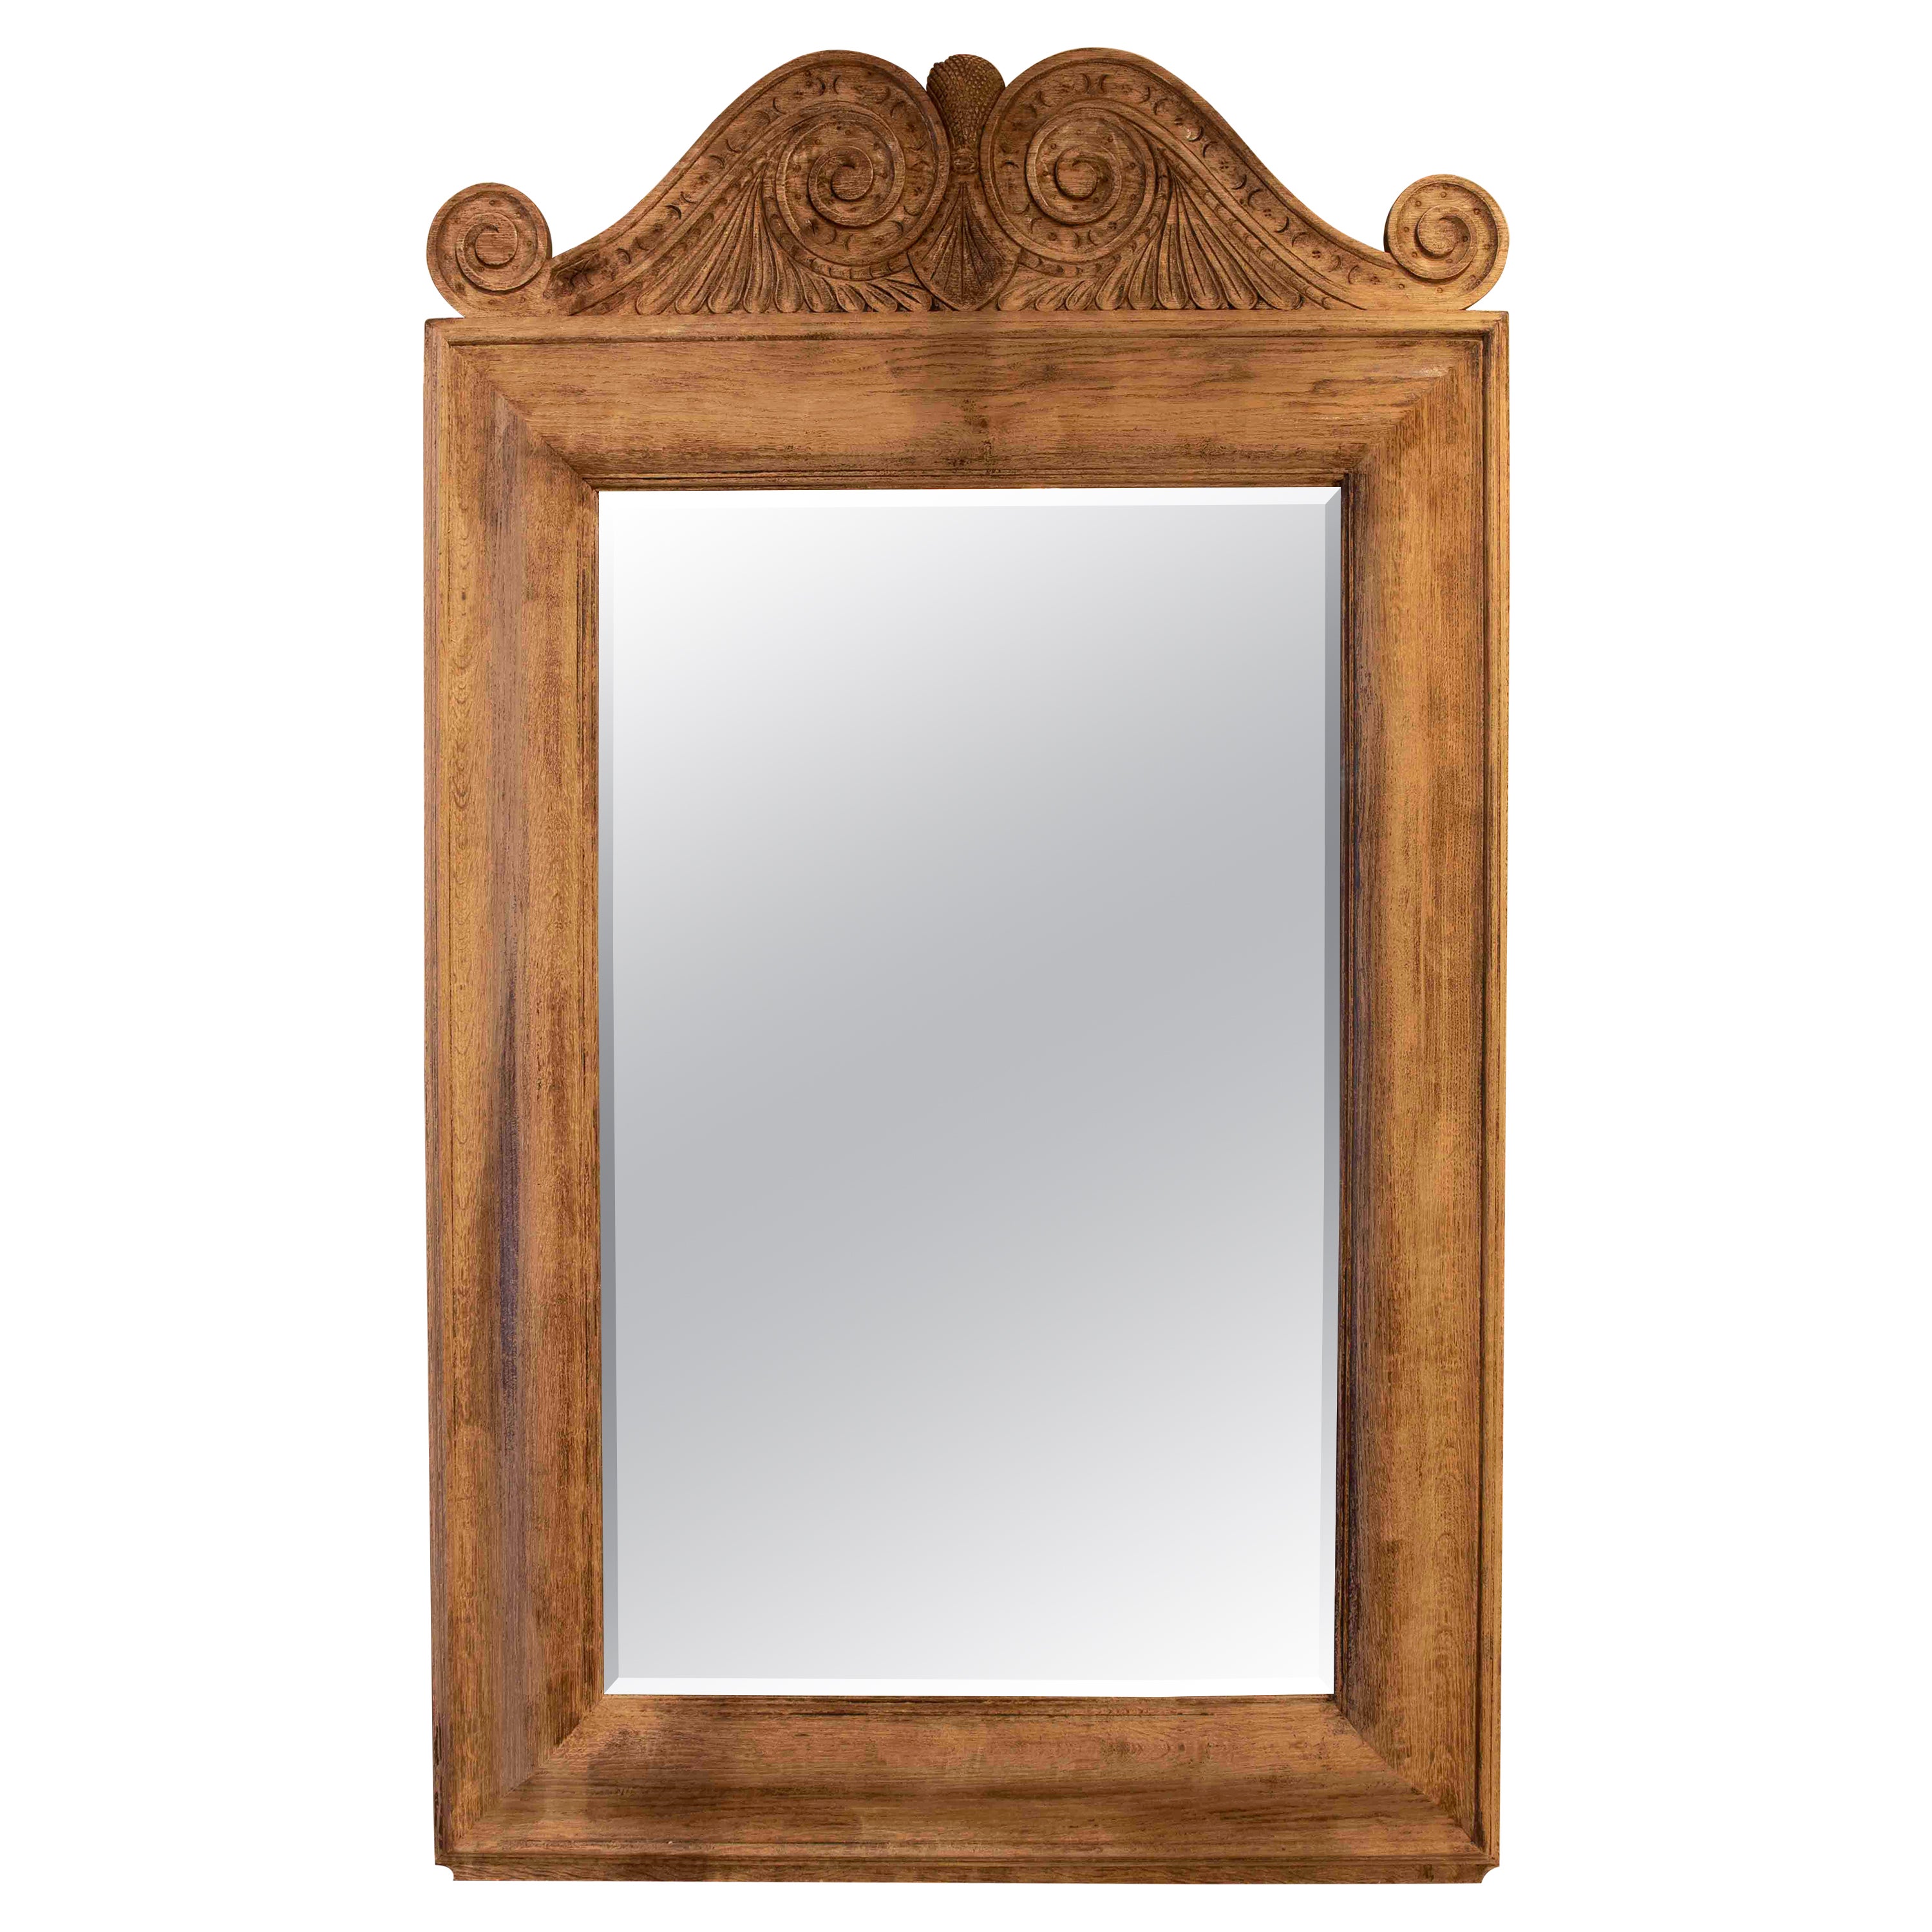 Hand-Carved Wooden Wall Mirror with Top For Sale